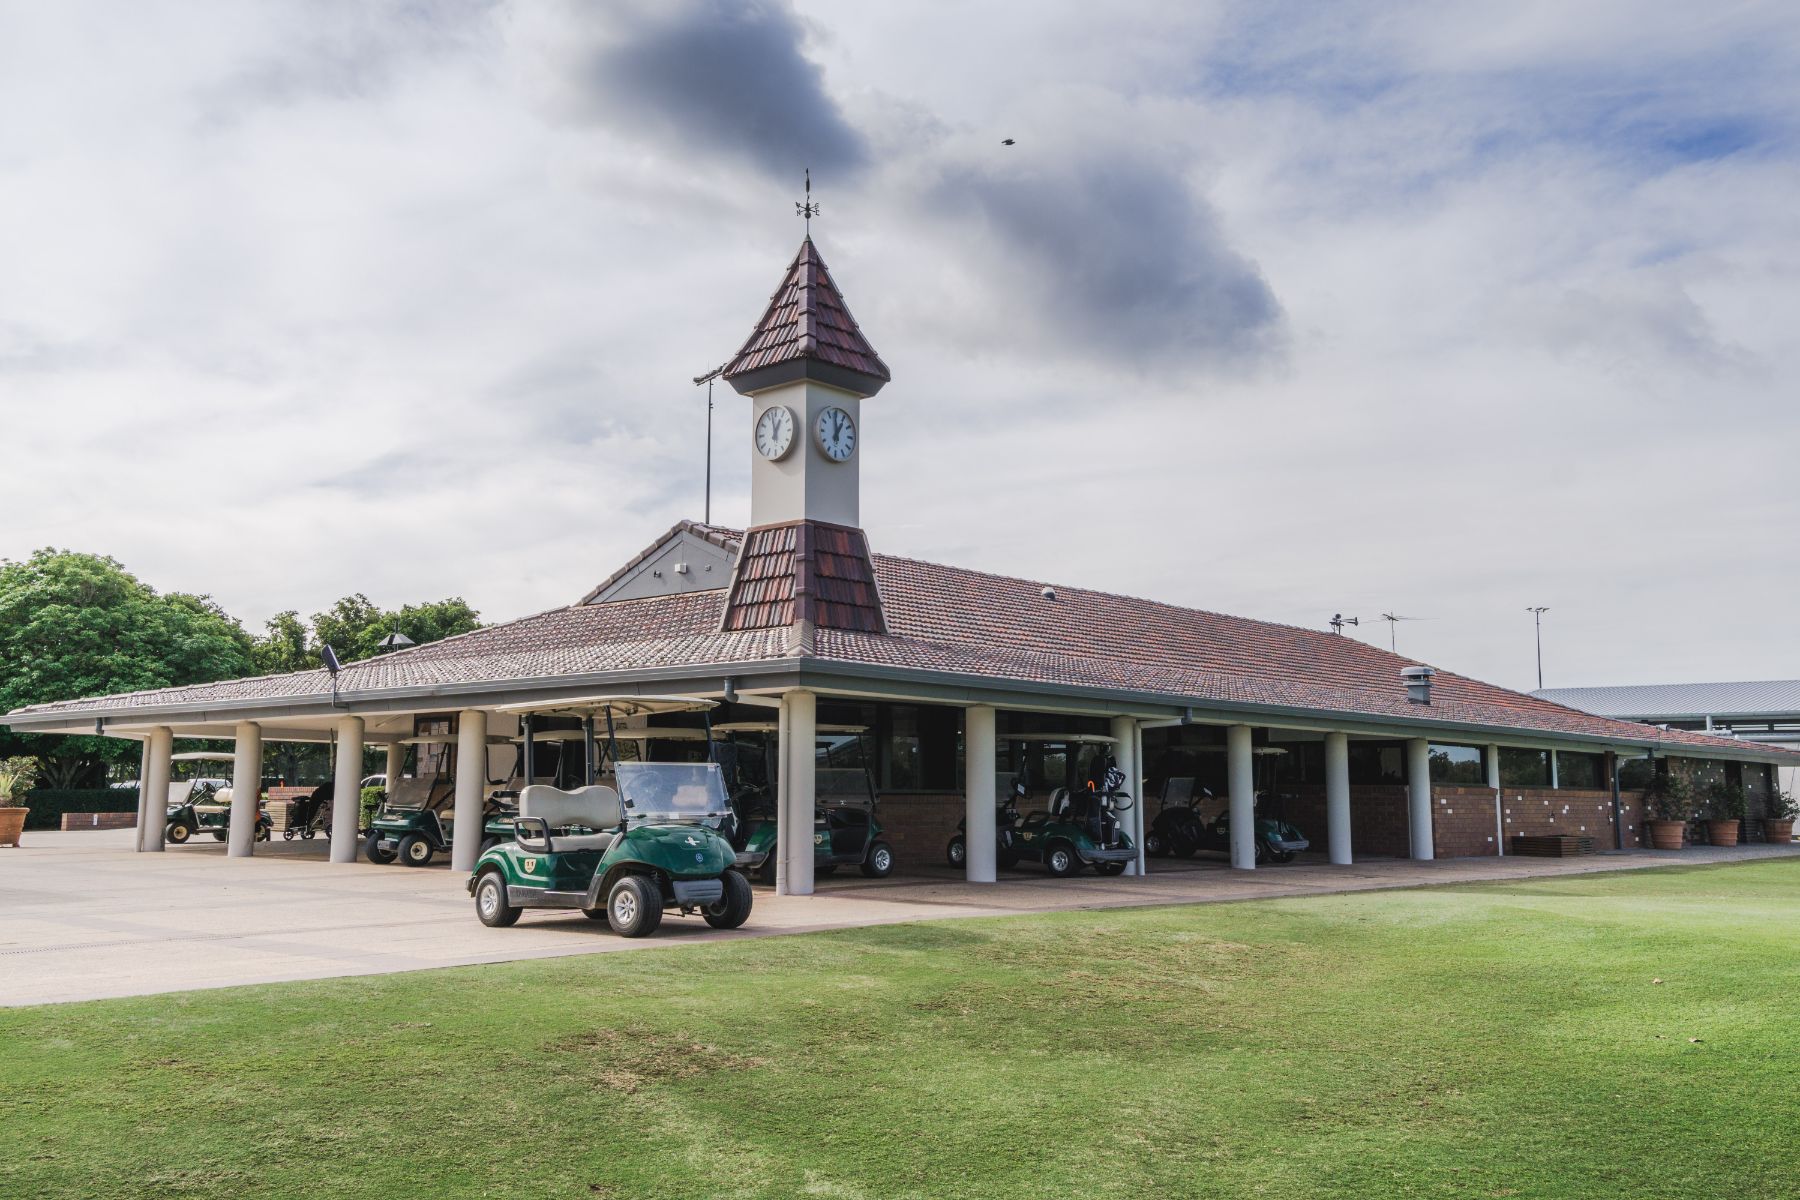 a golf cart parked in front of a building with a clock tower